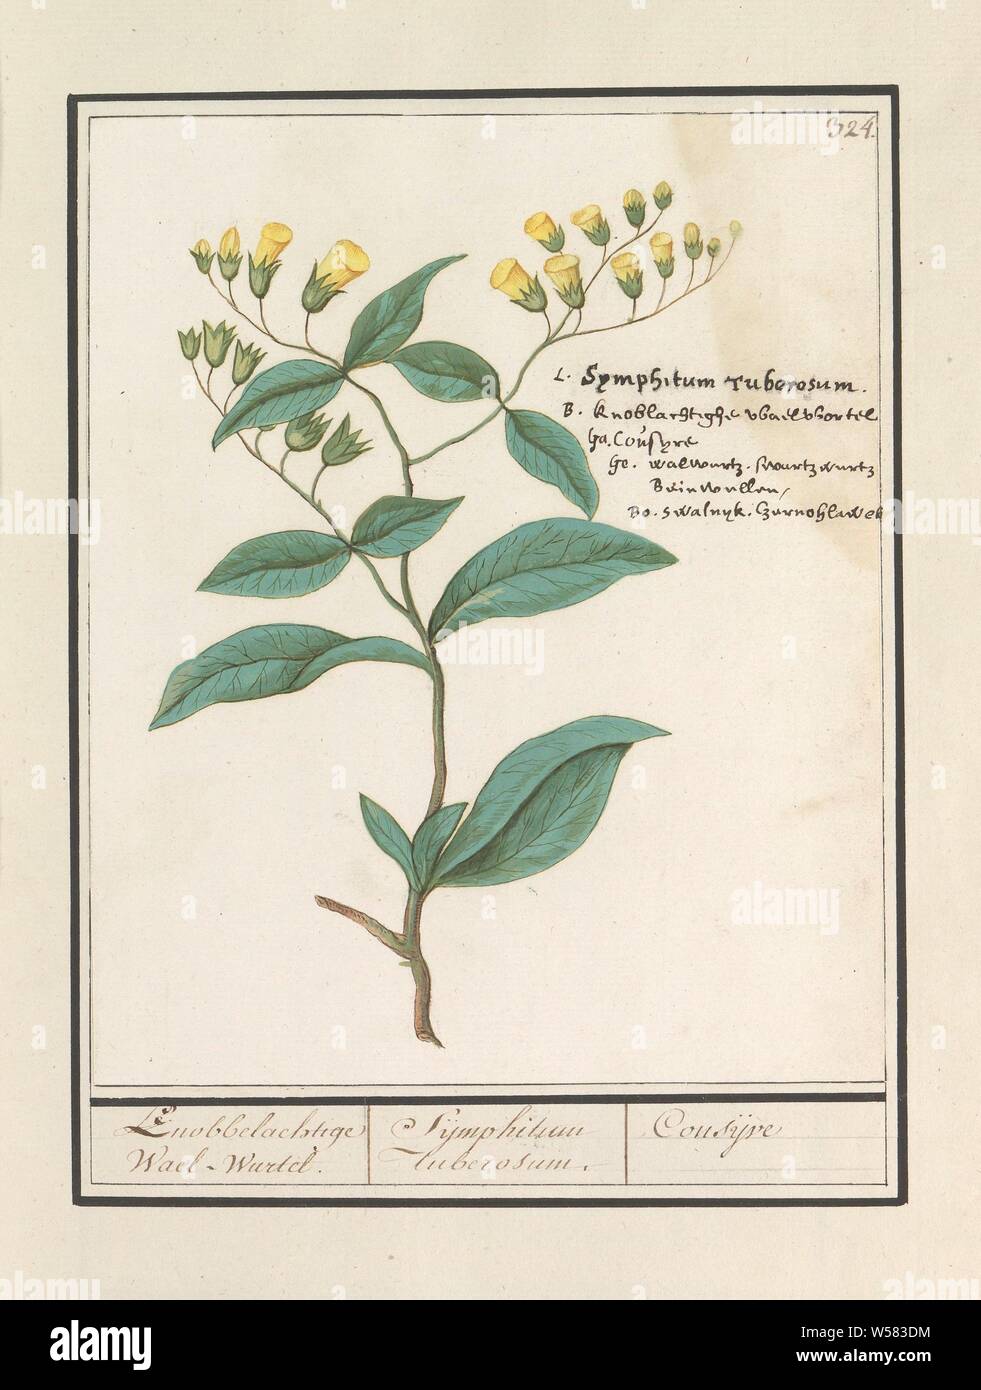 Regular comfrey (Symphytum officinale), Knobbelige Wael-Wurtel. / Sijmphitum Tuberosum. / Consijve (title on object), Comfrey or waltroot. Numbered top right: 324. Right the name in five languages. Part of the fourth album with drawings of flowers and mushrooms. Eleventh of twelve albums with drawings of animals, birds and plants known around 1600, commissioned by Emperor Rudolf II. With explanations in Dutch, Latin and French, Anselmus Boetius de Boodt, 1596 - 1610, paper, watercolor (paint), deck paint, chalk, ink, pen, h 208 mm × w 170 mm Stock Photo